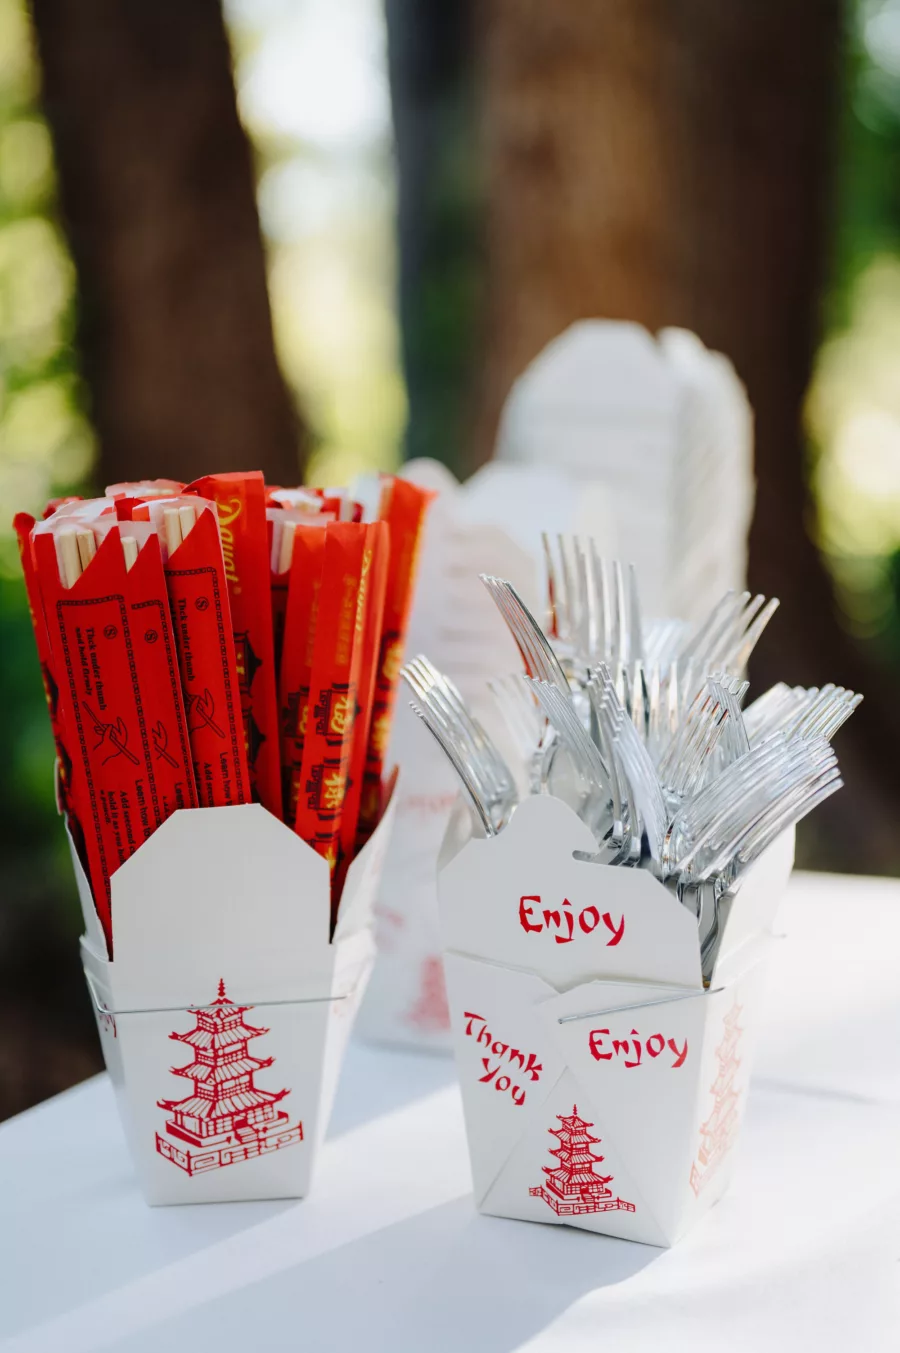 Chinese Food Container Flatware Caddy for Whimsical Wedding Reception